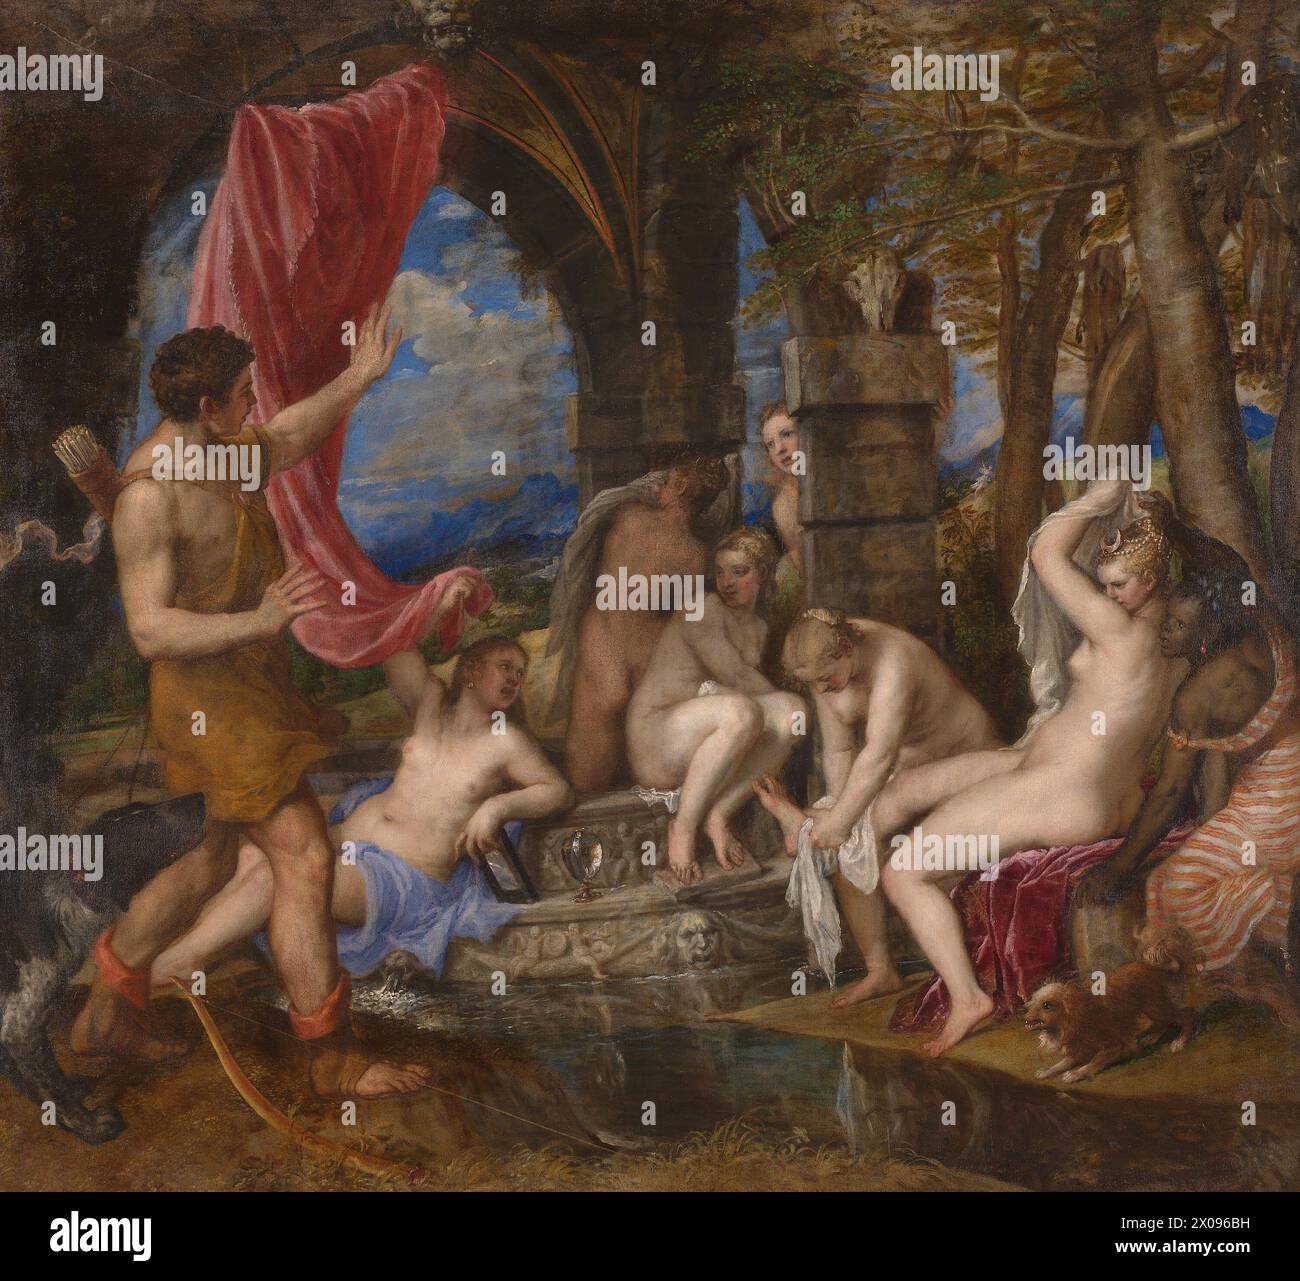 Diana and Actaeon, 1556–1559, owned jointly by London's National Gallery and the National Gallery of Scotland, Edinburgh Titian Stock Photo